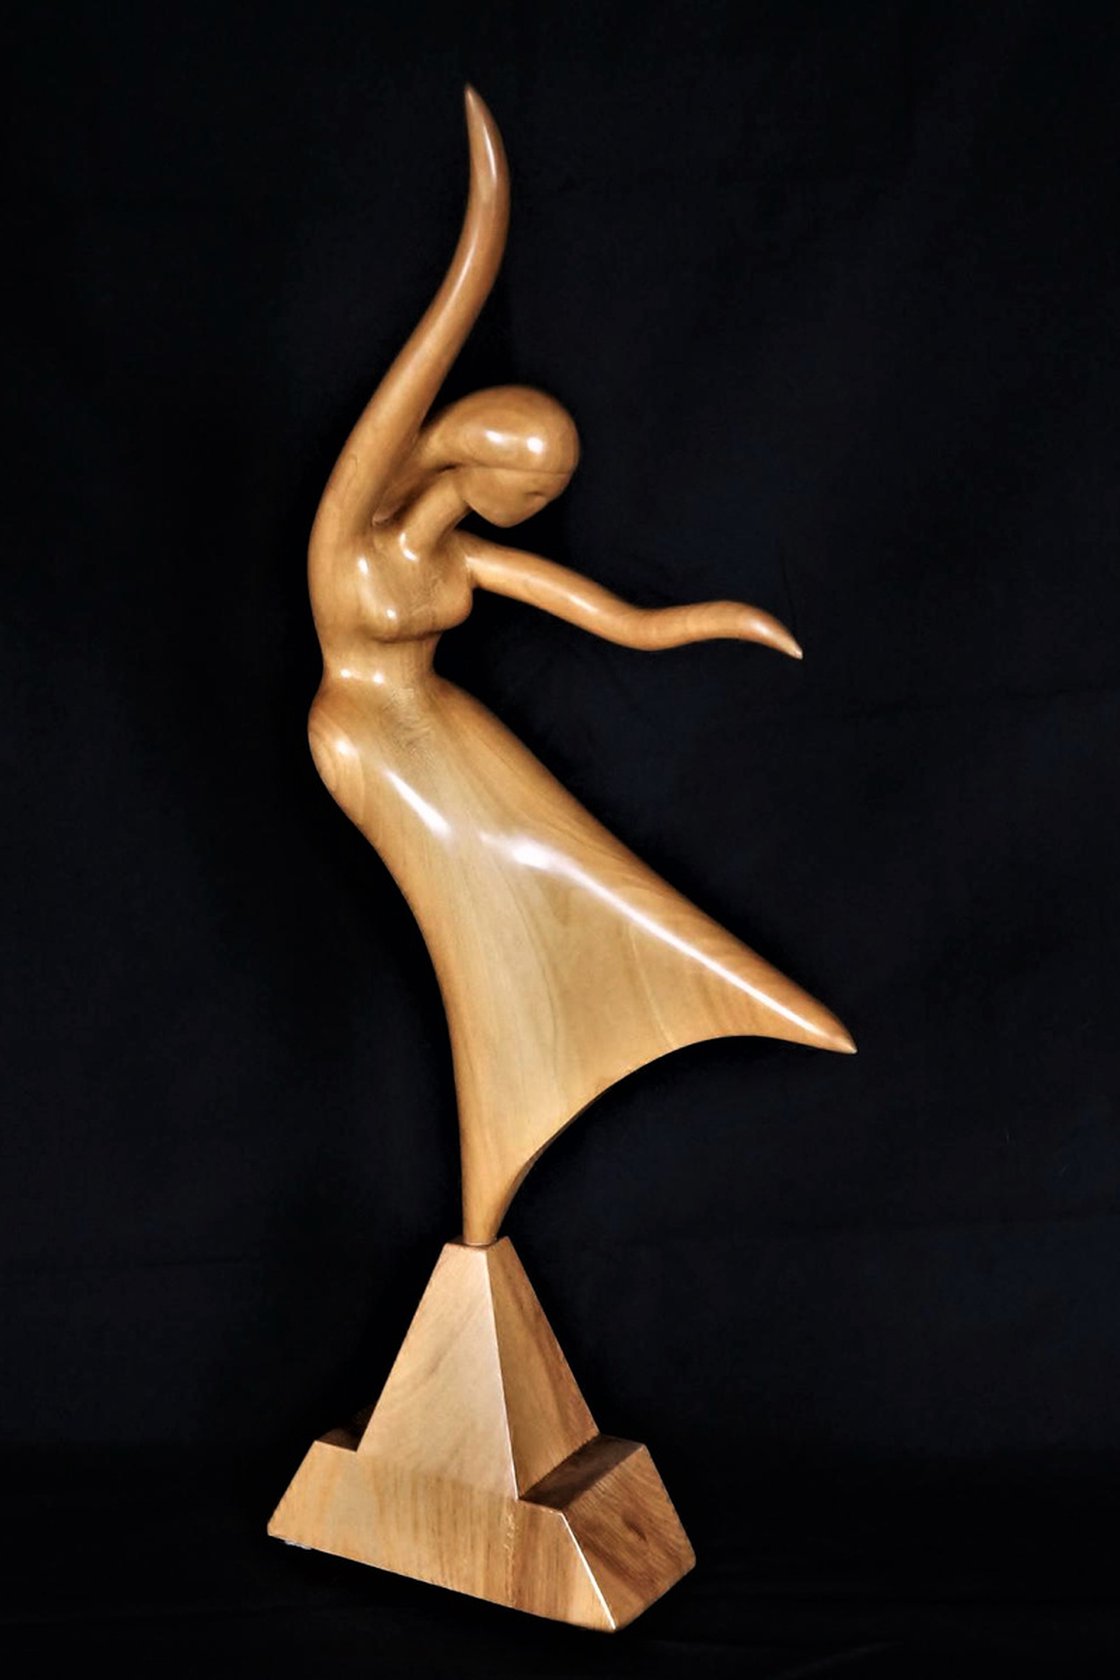 Nude Woman Wood Sculpture GIRL and TREE Wood sculpture by Jakob Wainshtein